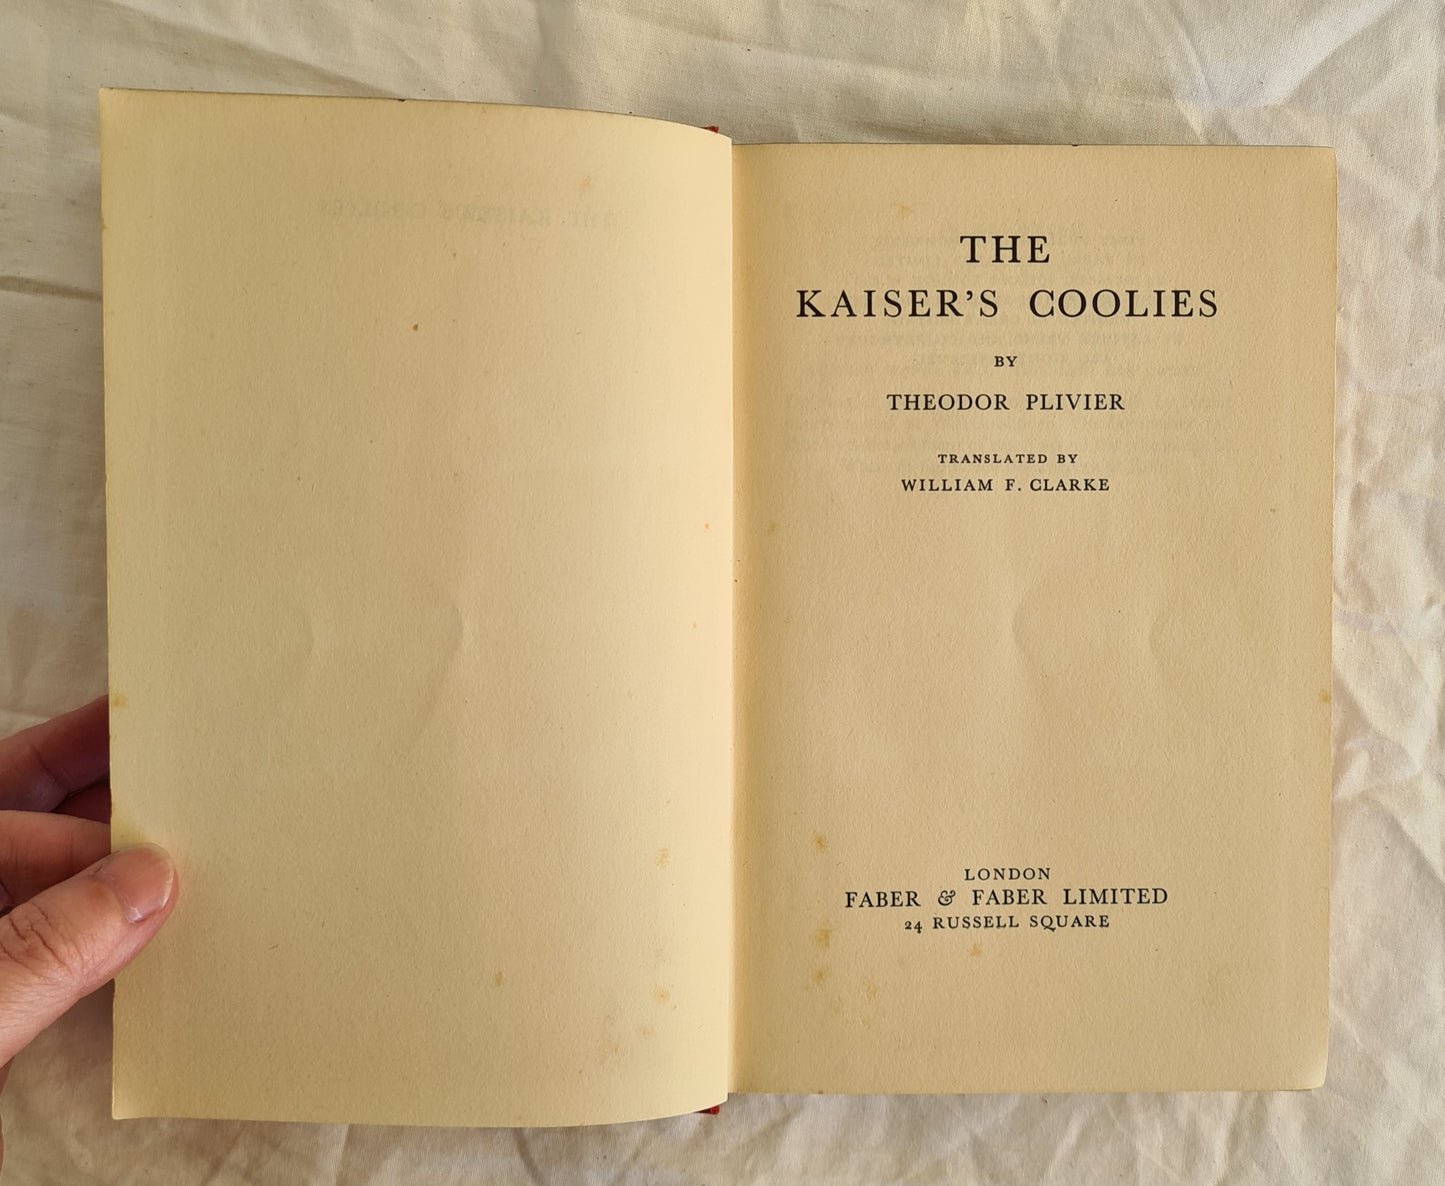 The Kaiser’s Coolies  by Theodore Plivier  translated by William F. Clarke